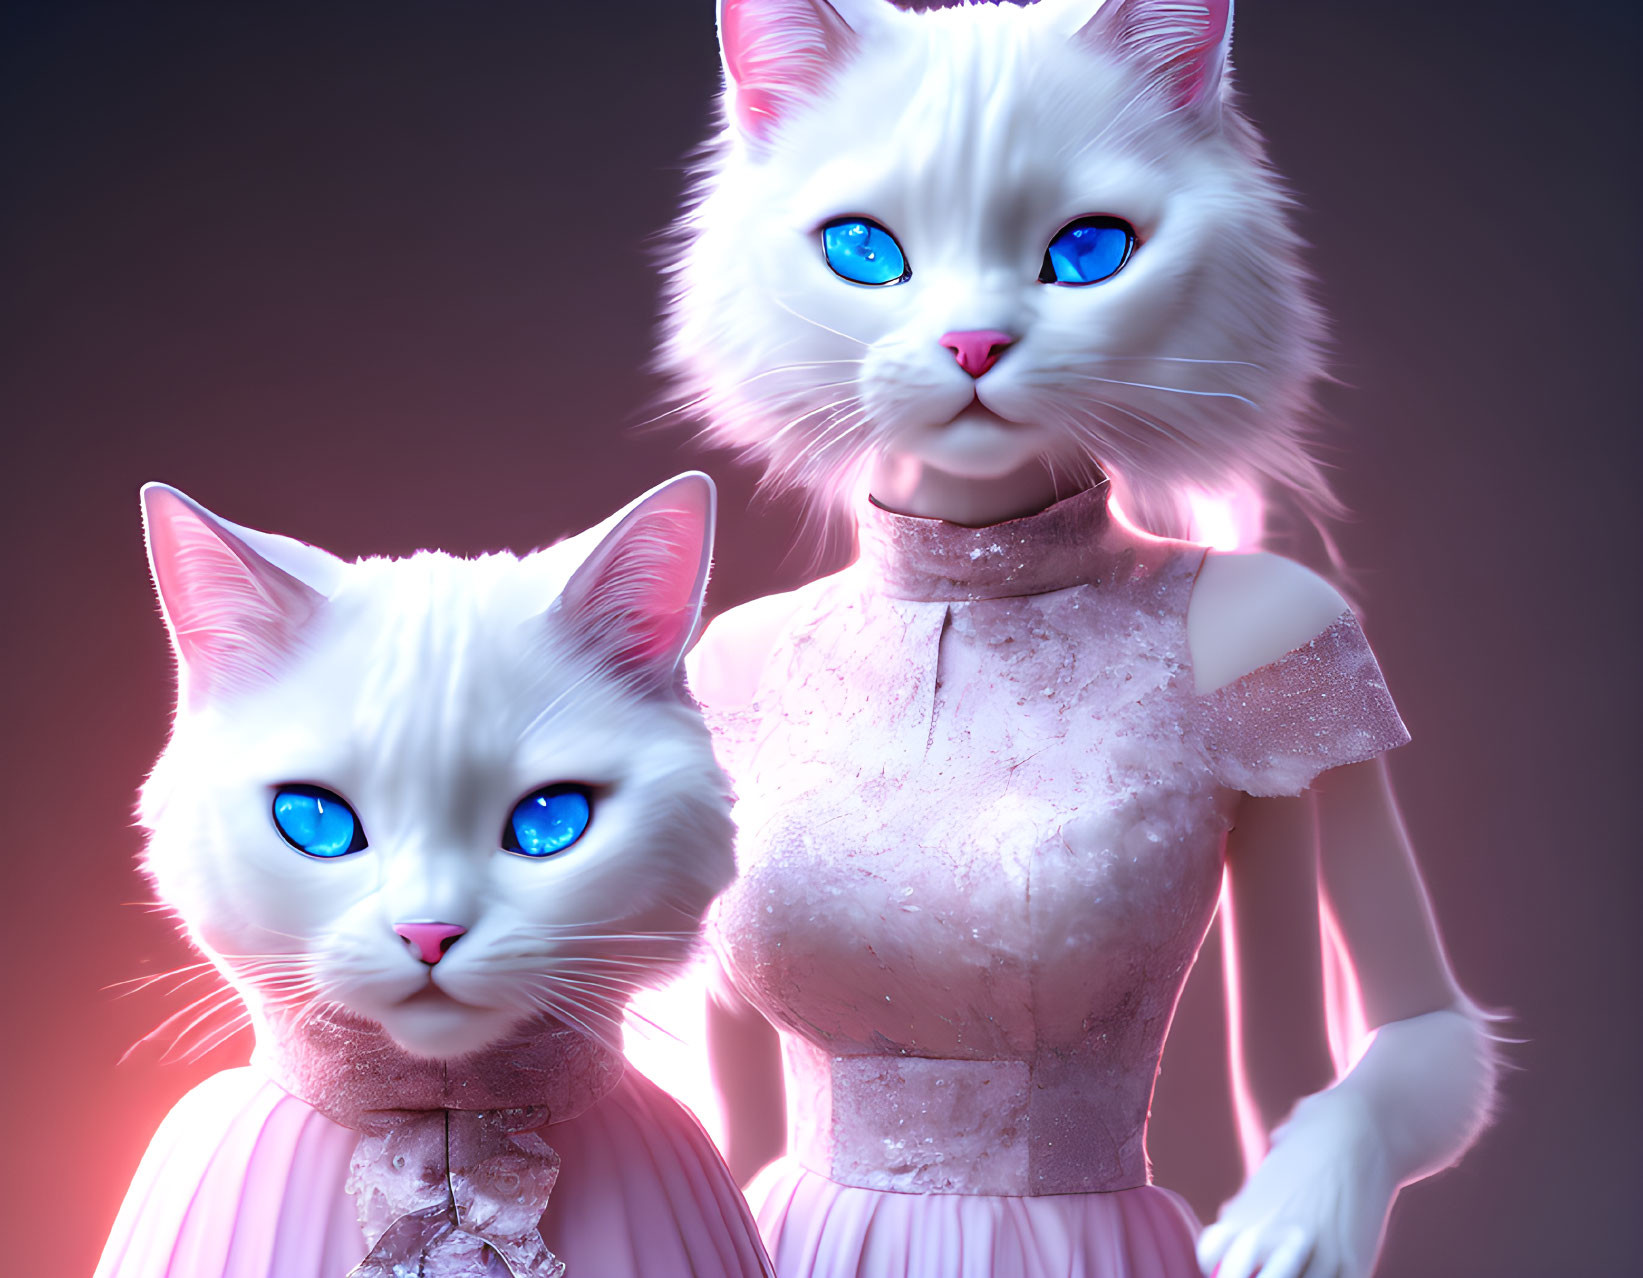 Anthropomorphic white cats in elegant pink attire against moody backdrop